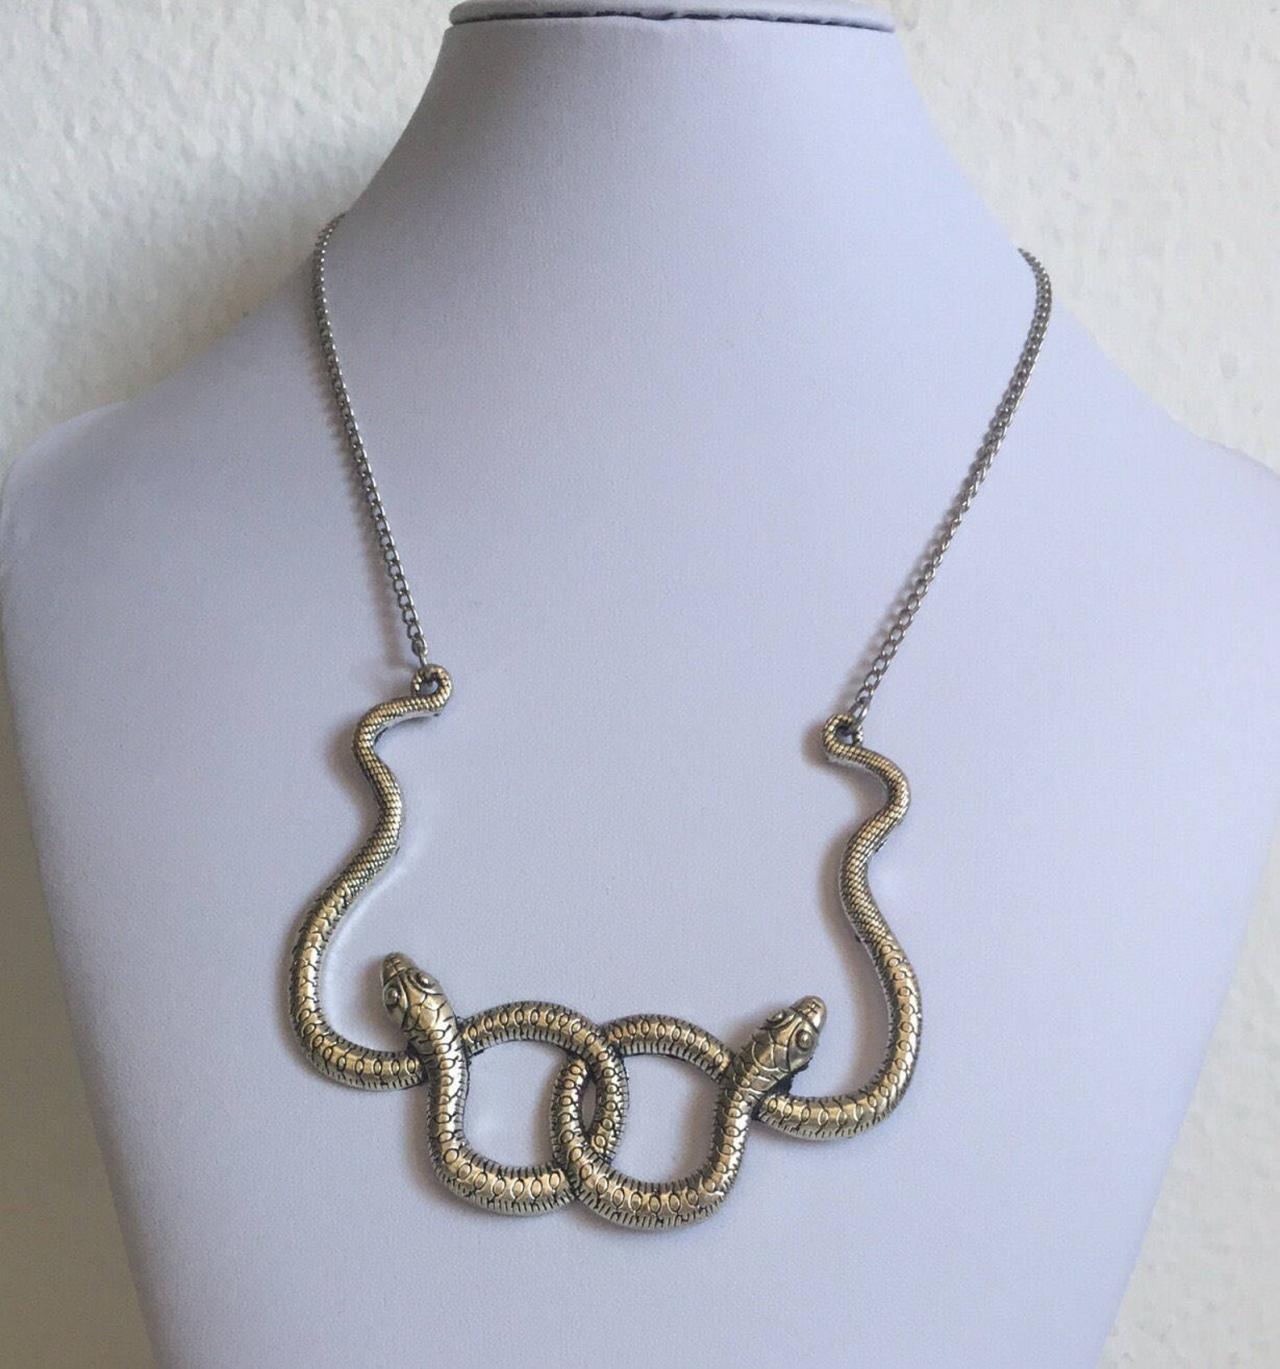 Snake Necklace 322- Alloy Silver Snake Necklace Bohemian Alloy Silver Chain Boho Chic Jewelry Necklace Gift